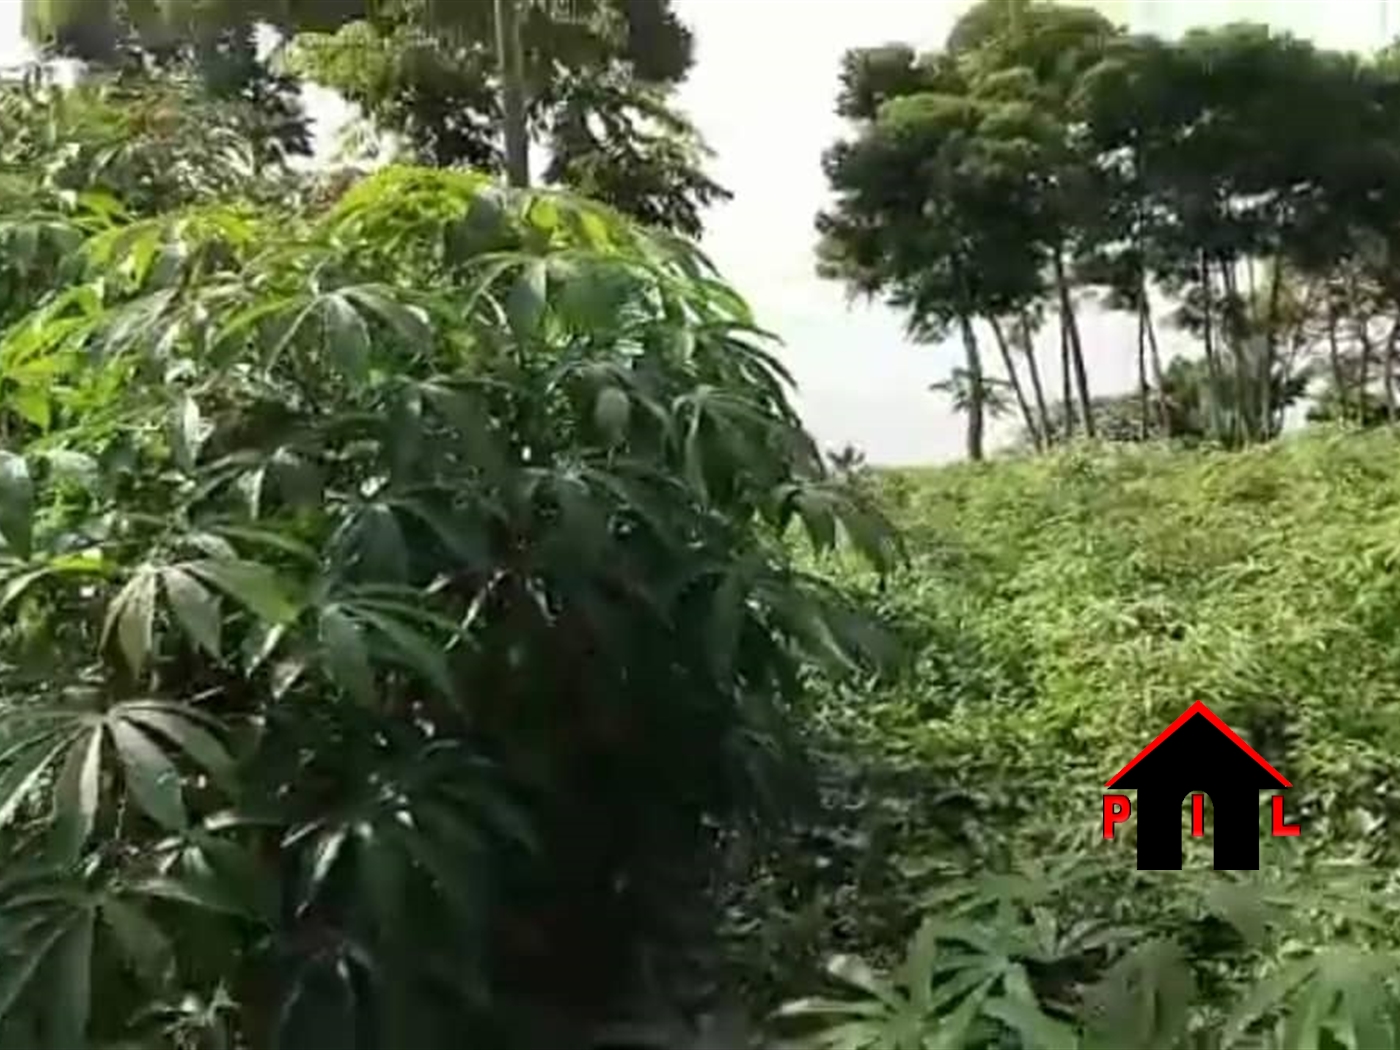 Agricultural Land for sale in Kanoni Gomba